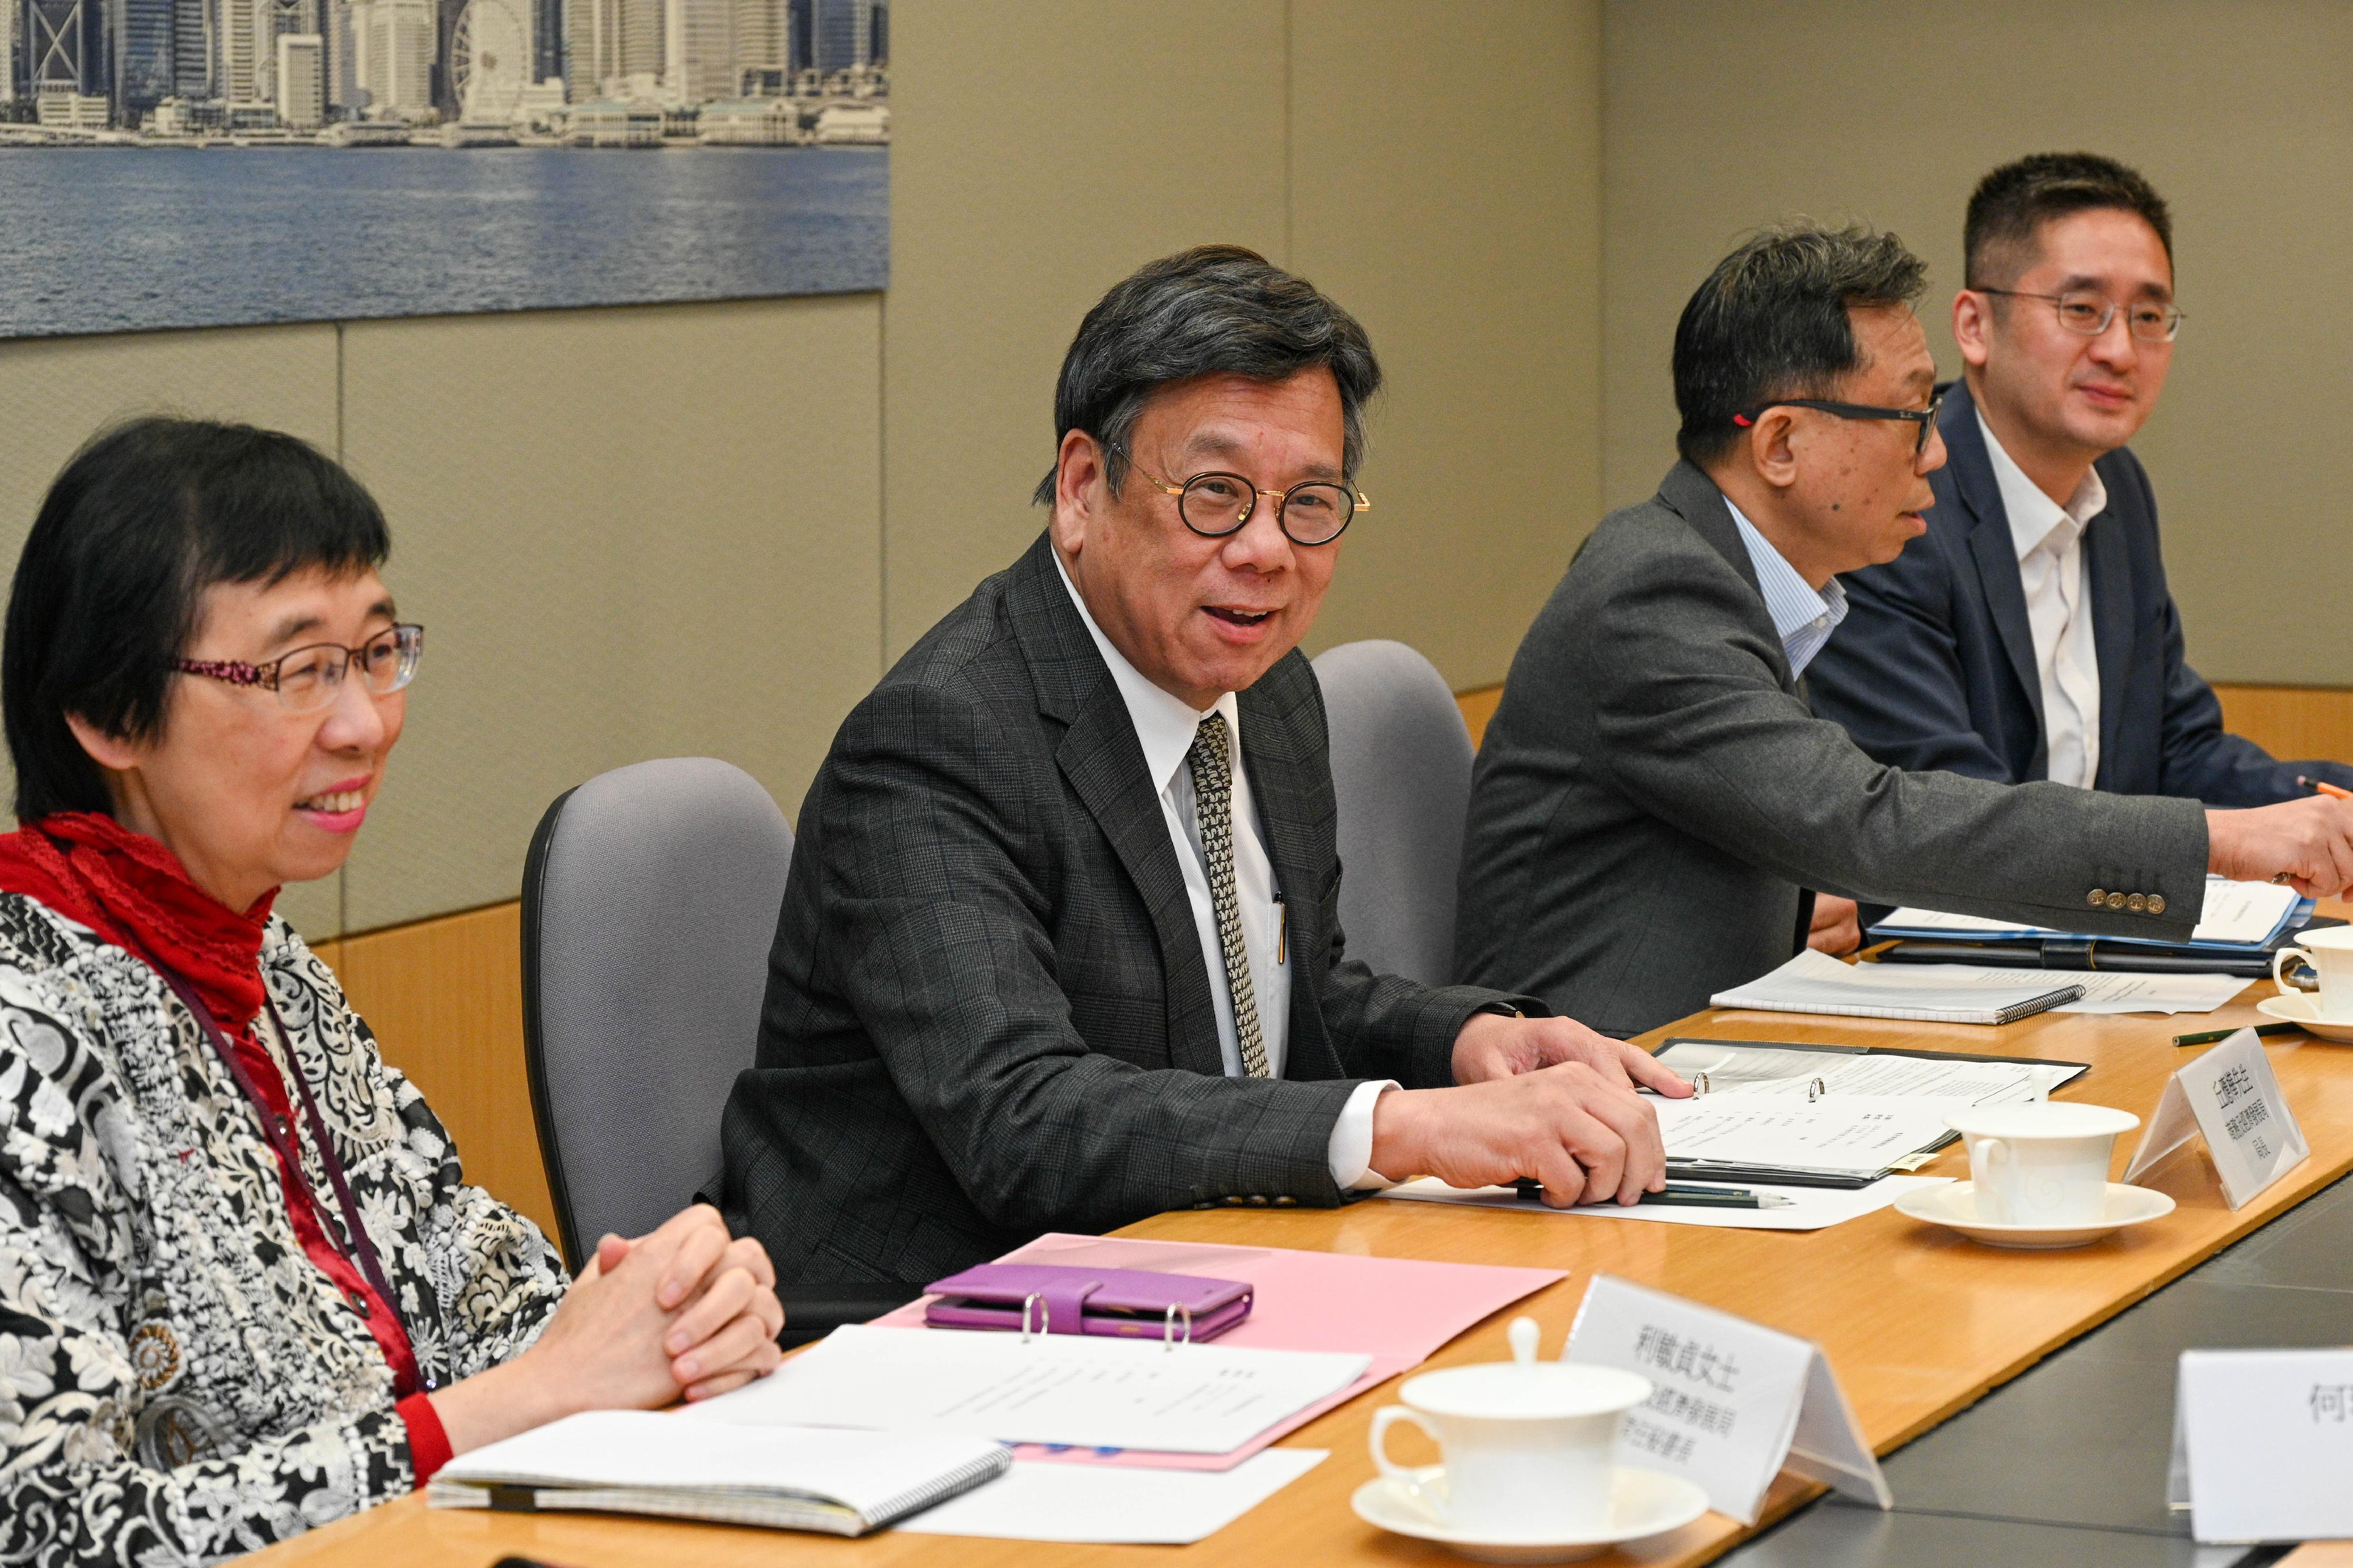 Chaired by the Secretary for Commerce and Economic Development, Mr Algernon Yau (second left), the E-commerce Development Task Force today (January 29) convened its first meeting to kick-start the work on co-ordinating and formulating policies and measures on the development of electronic commerce. The Permanent Secretary for Commerce and Economic Development, Miss Eliza Lee (first left), and the Under Secretary for Commerce and Economic Development, Dr Bernard Chan (first right), also attended the meeting.